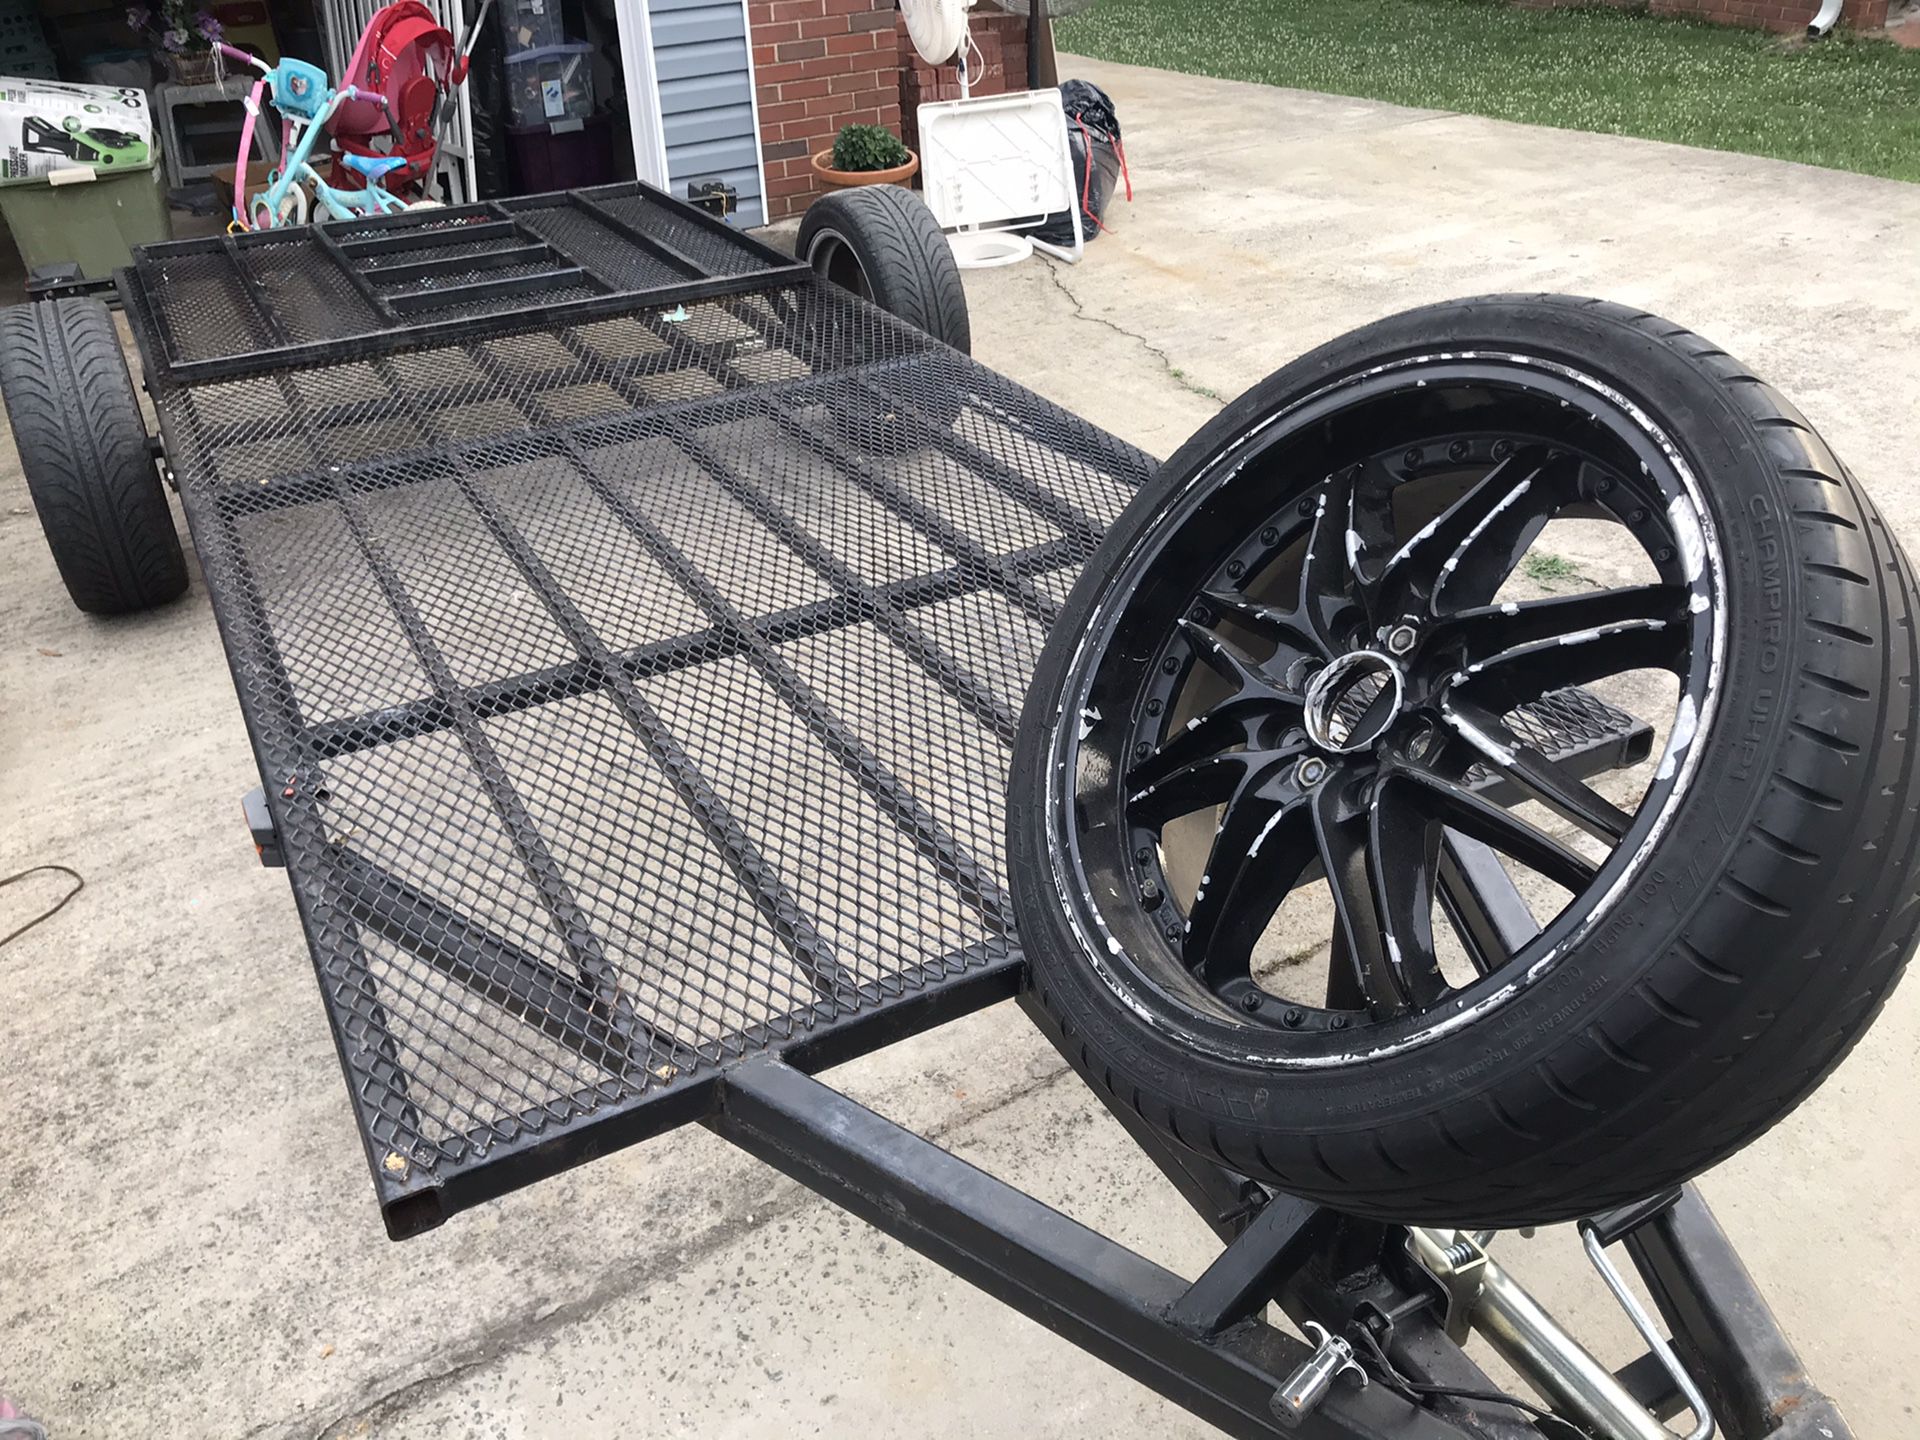 12x5 home make trailer 4 foot ramp with 17 inch wheels and title on hand